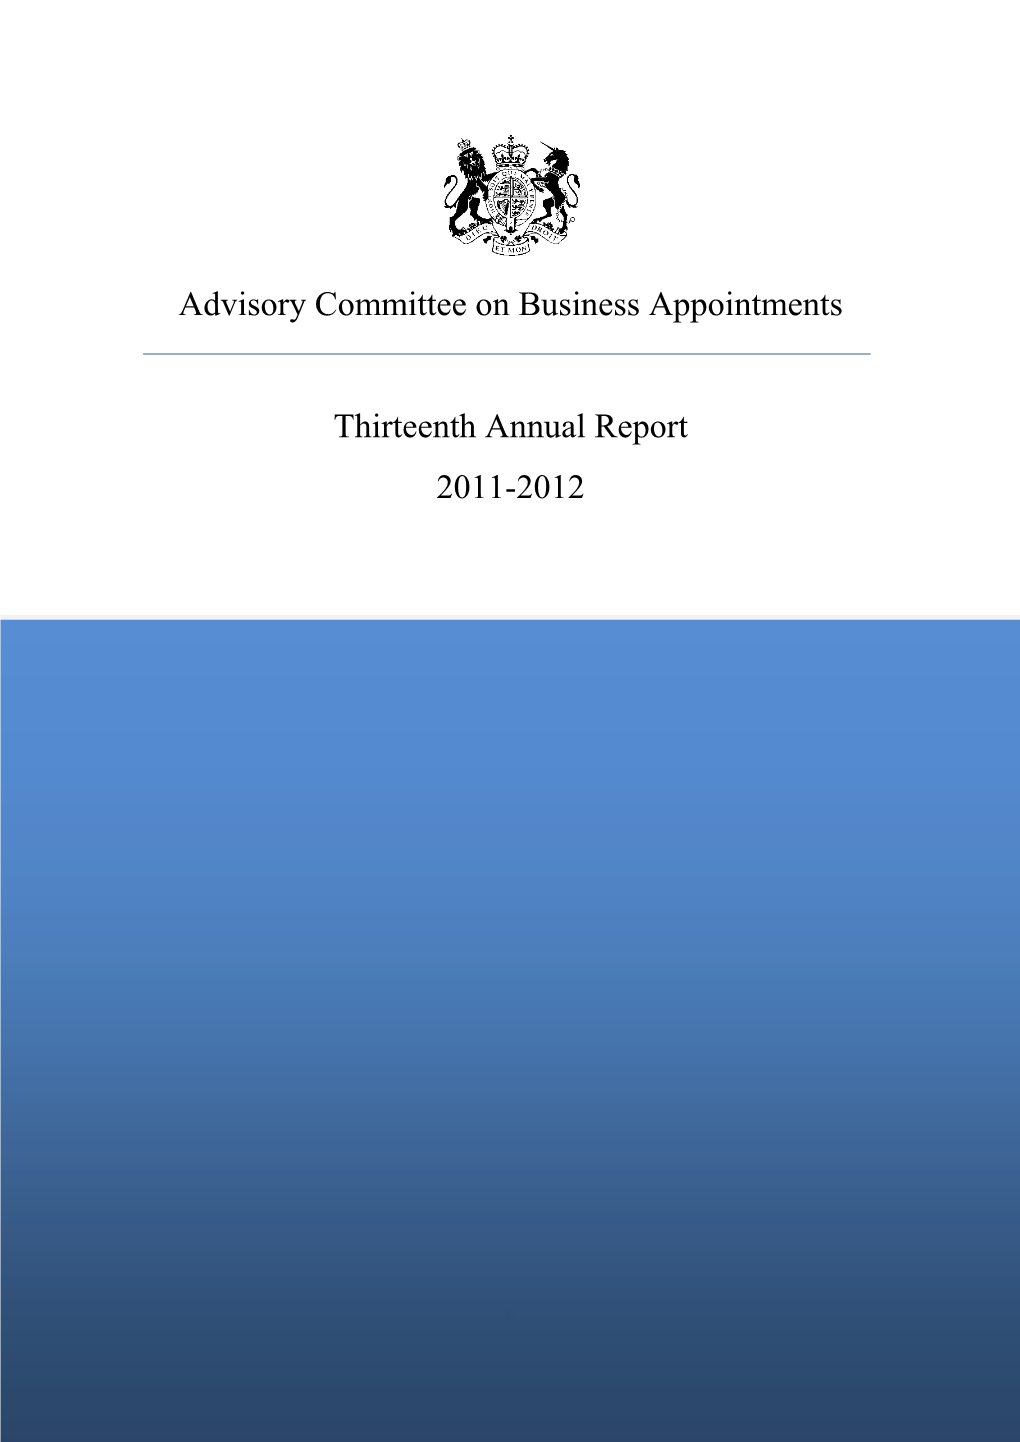 Advisory Committee on Business Appointments Thirteenth Annual Report 2011-2012